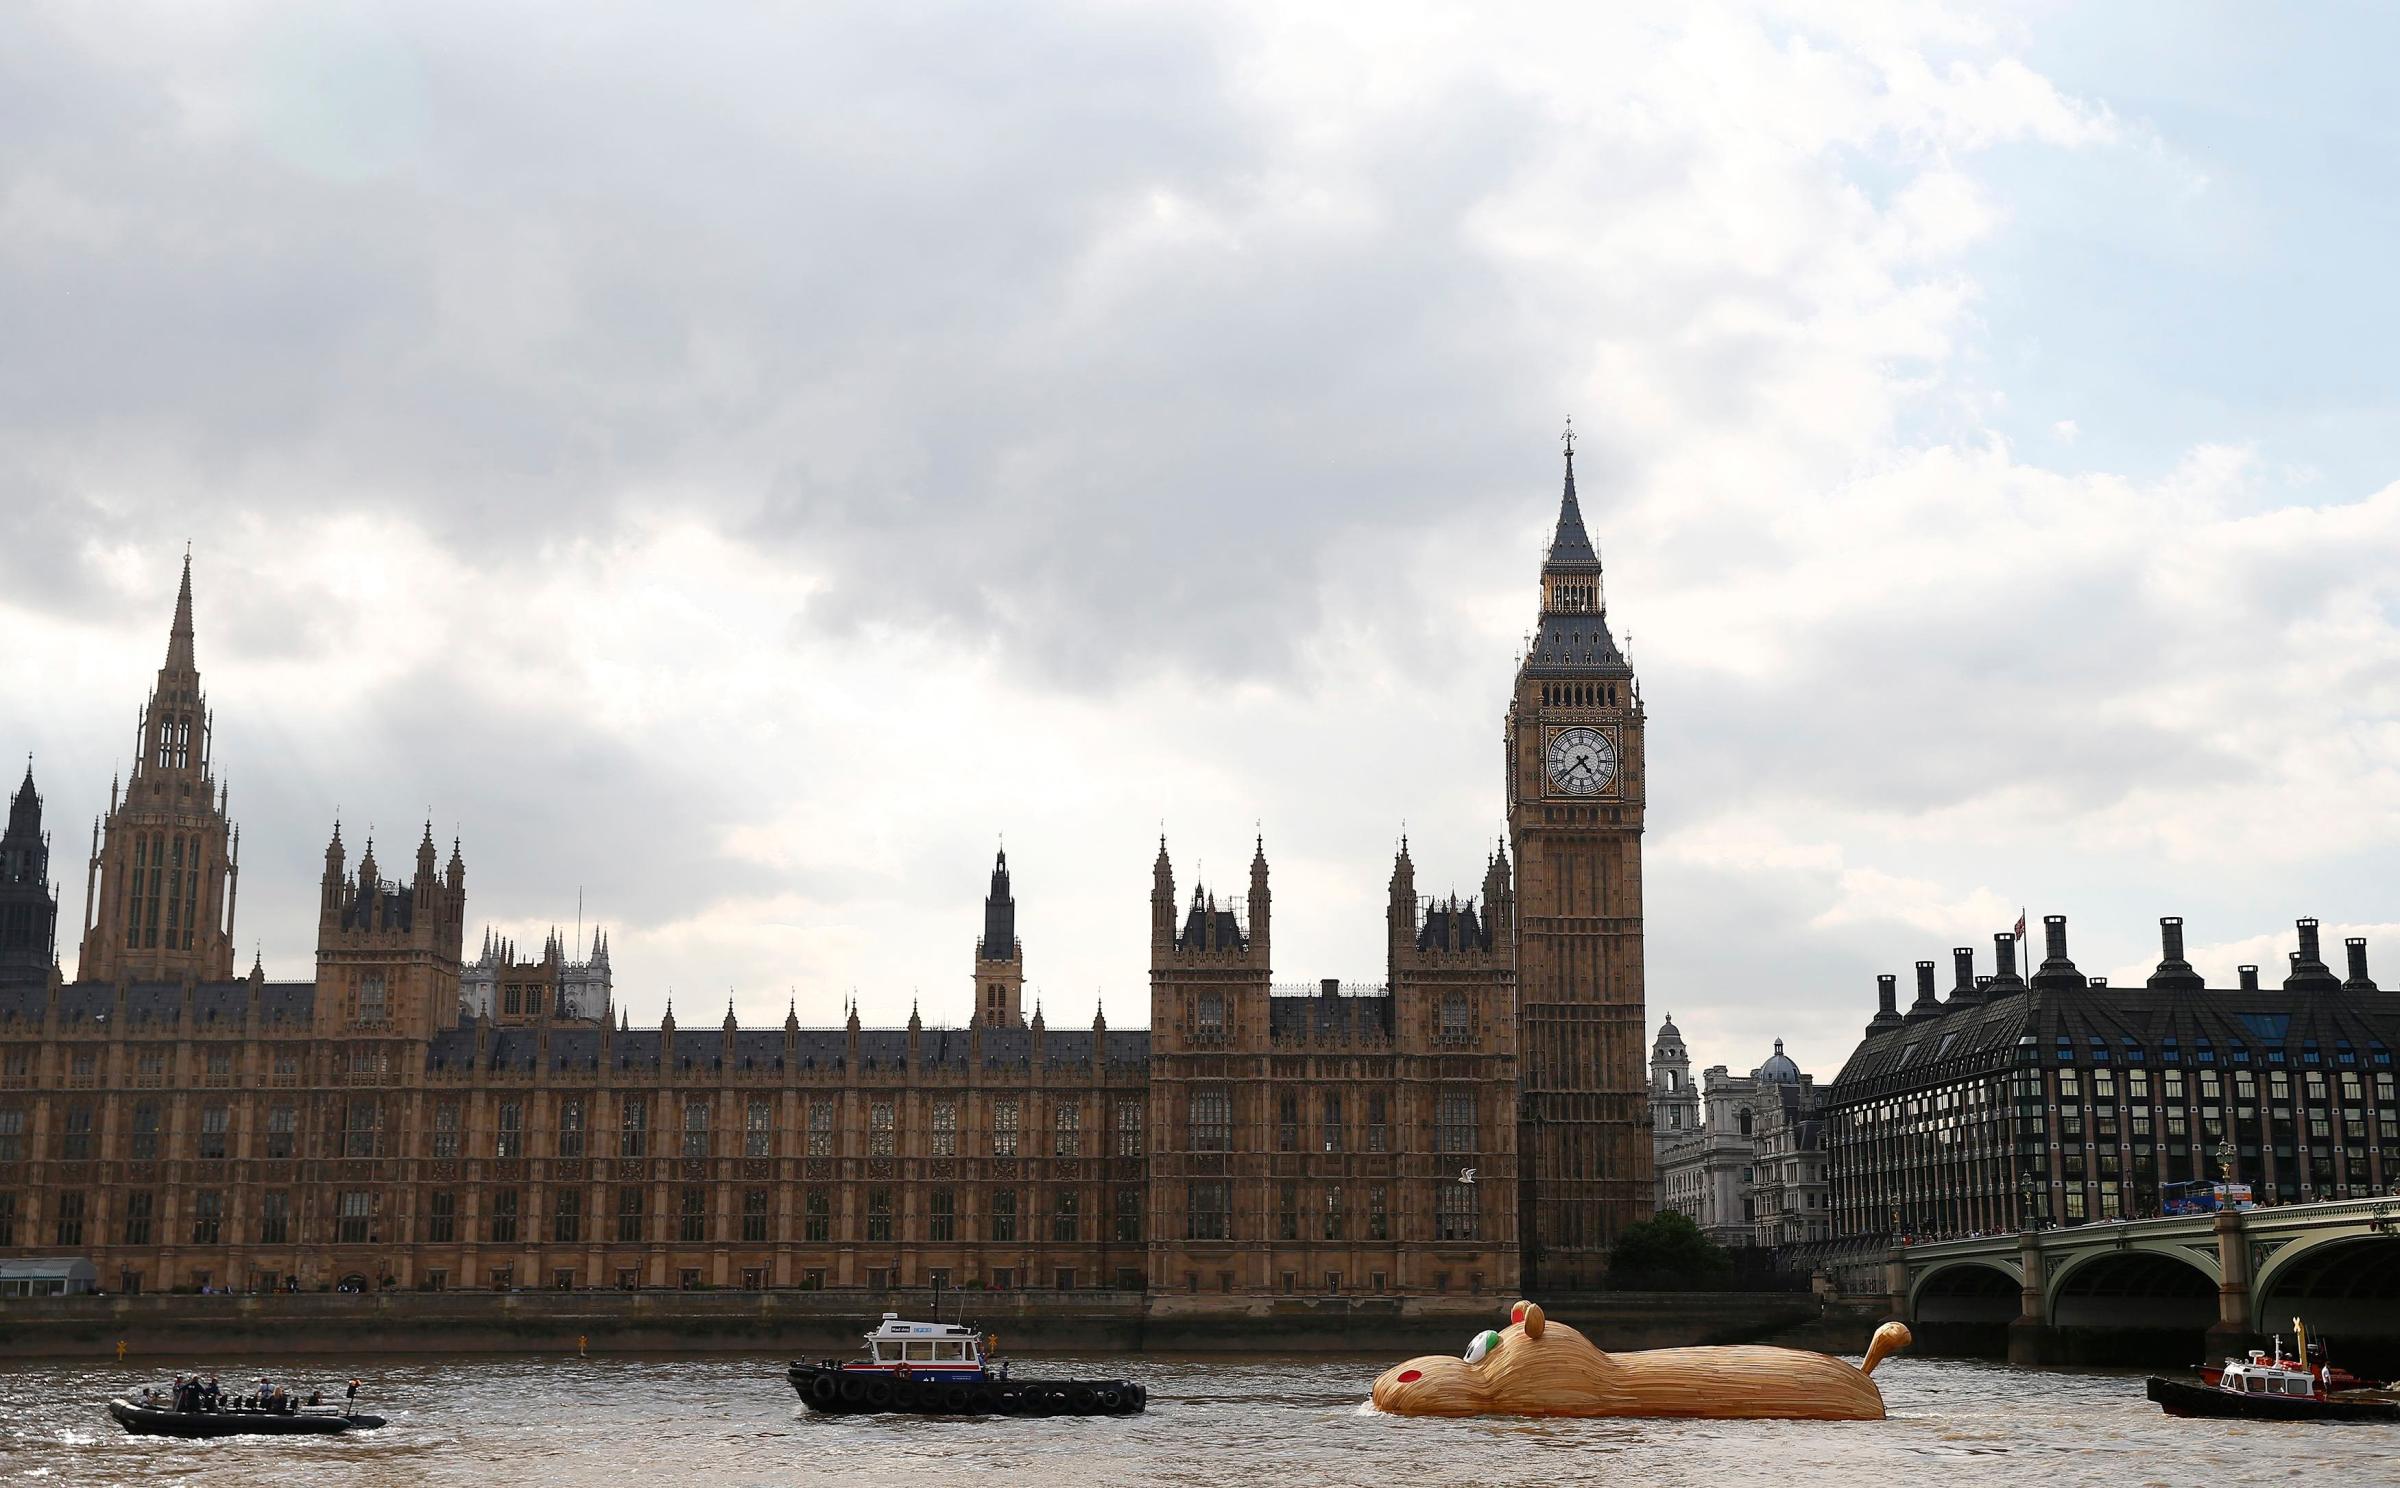 A sculpture of a giant hippopotamus, "HippopoThames", built by artist Florentjin Hofman is towed up the Thames past the Houses of Parliament in central London on Sept. 2, 2014.